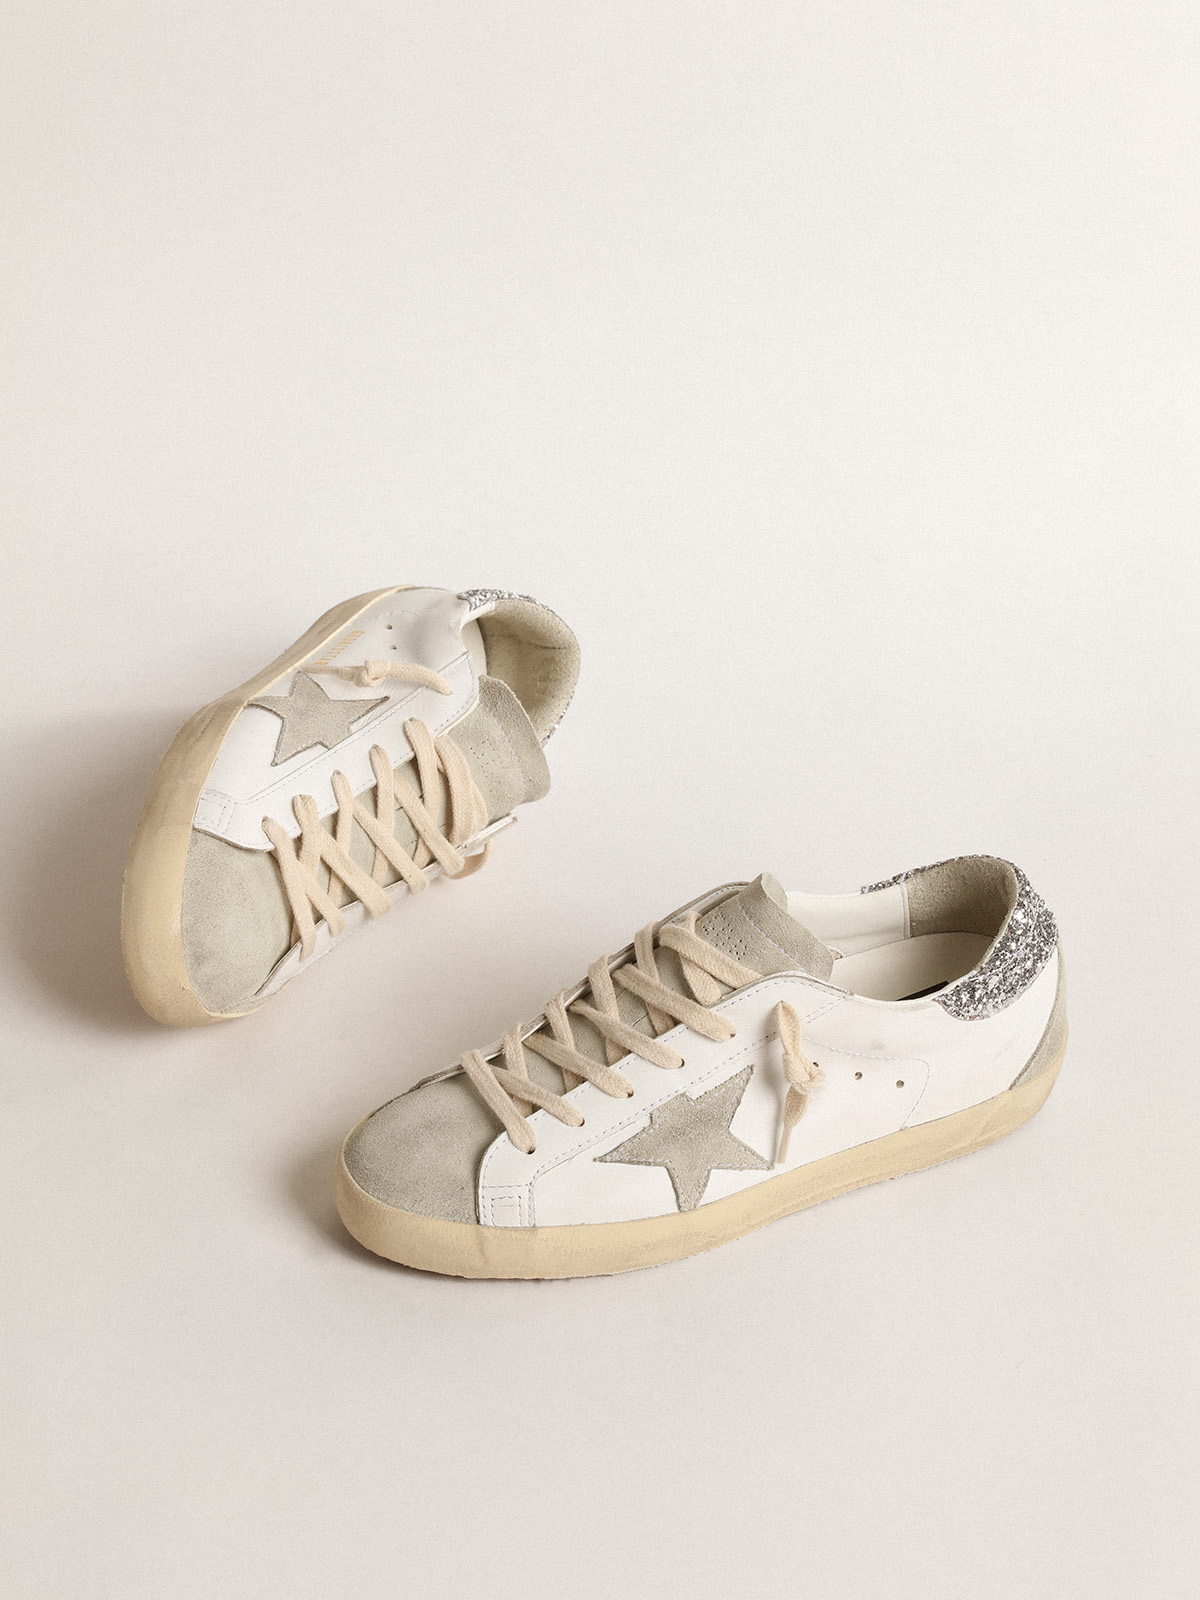 Super-Star with gray star and silver glitter heel tab | Golden Goose